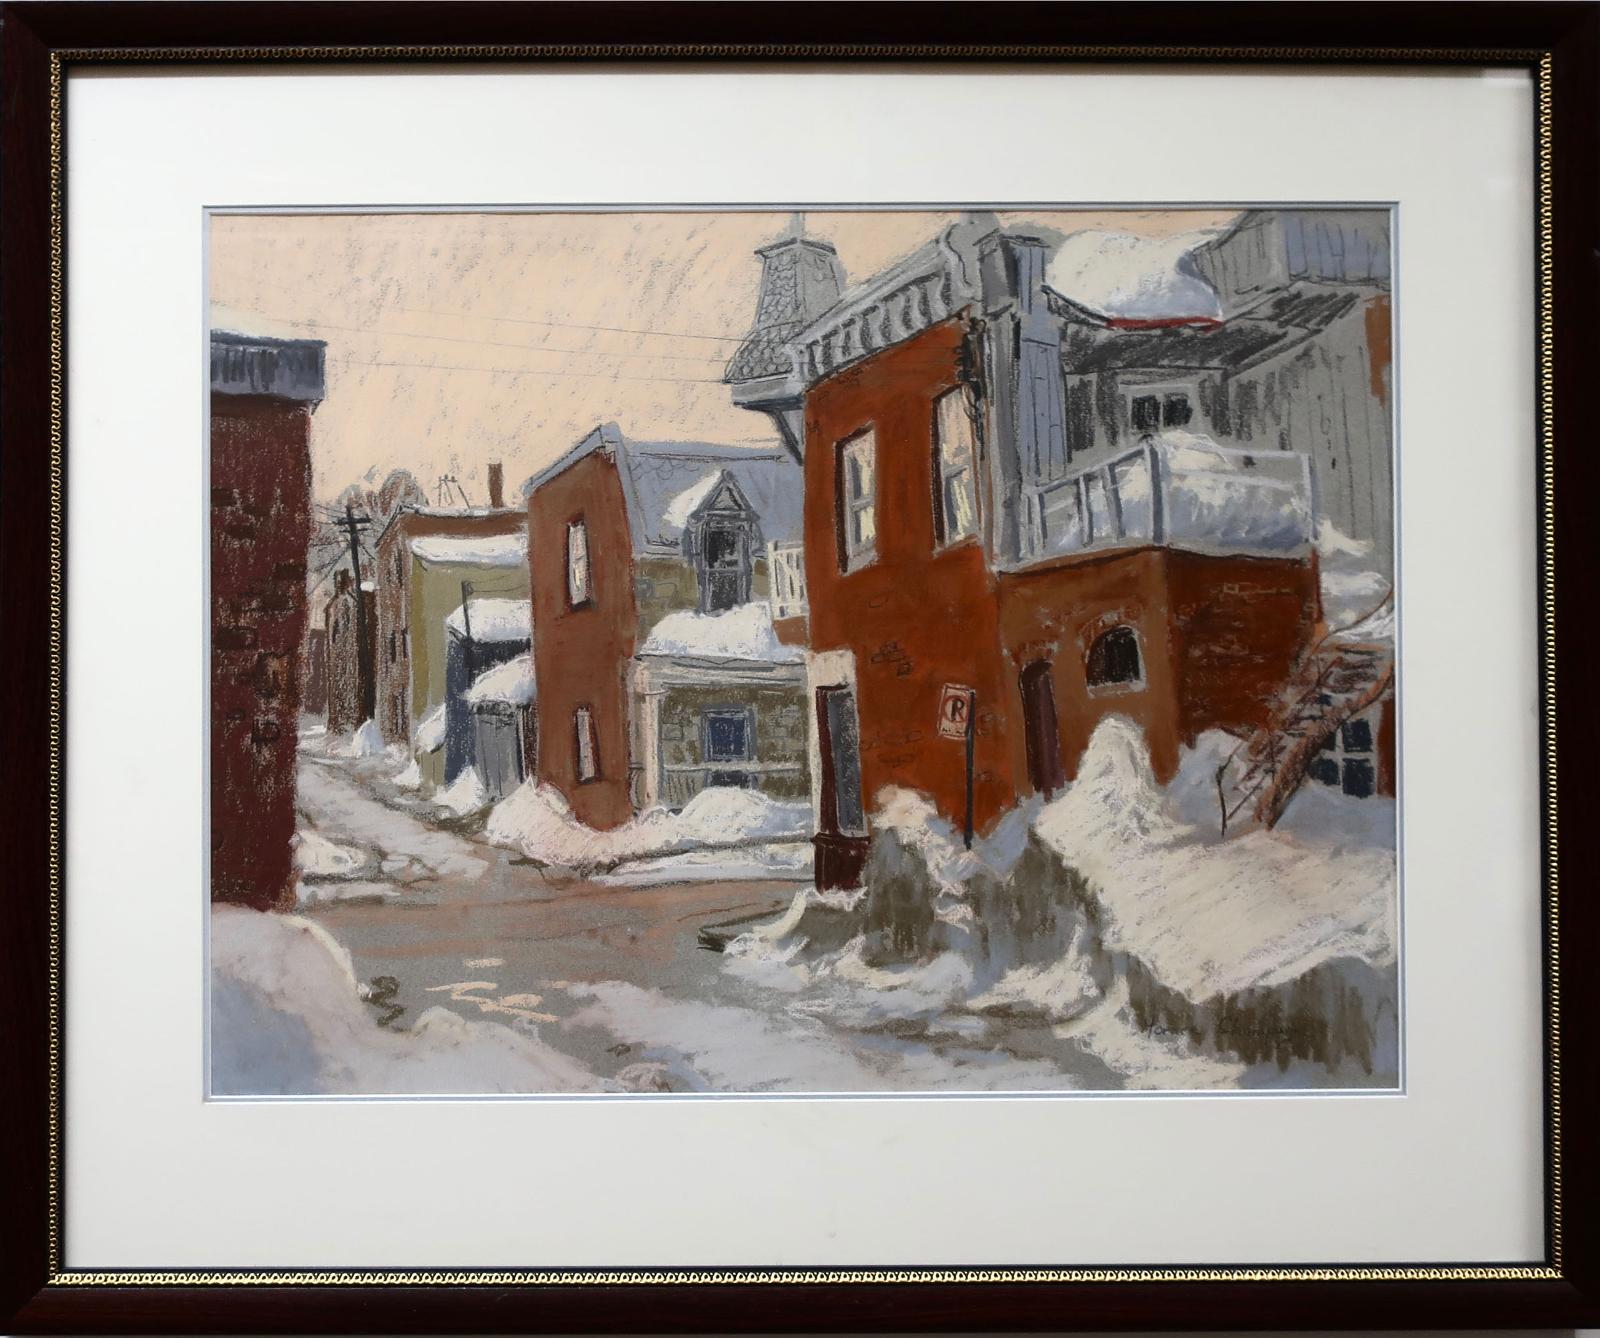 Horace Champagne (1937) - Alleyway At Christopher Colombe Street, Montreal, Quebec